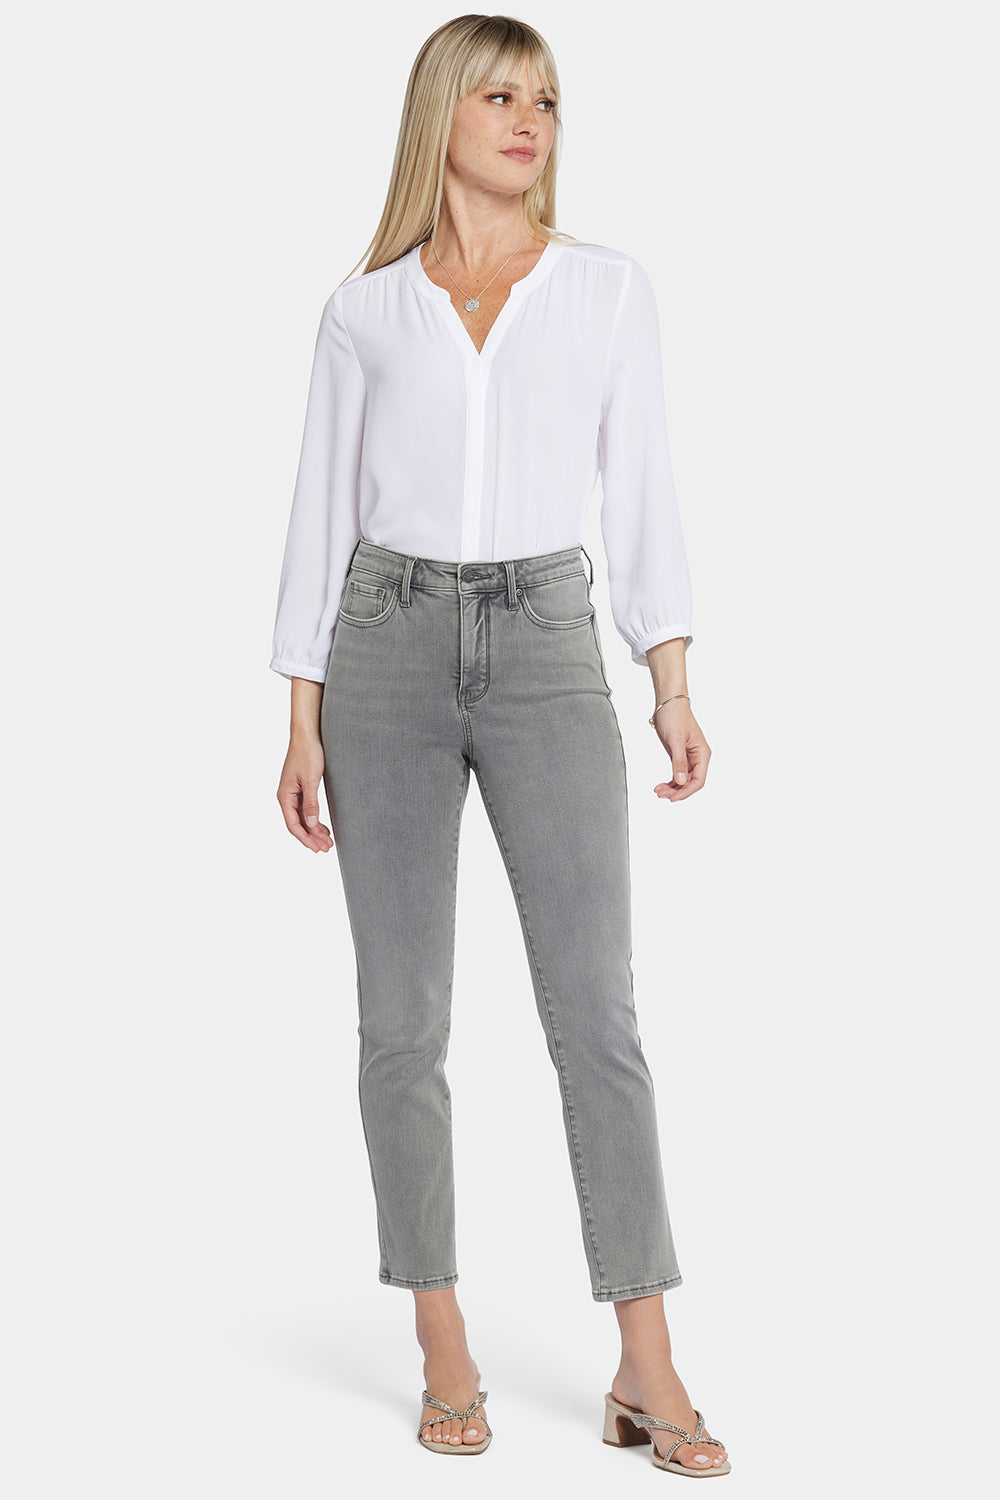 NYDJ Curve Shaper™ Sheri Slim Ankle Jeans With High Rise - Island Pines